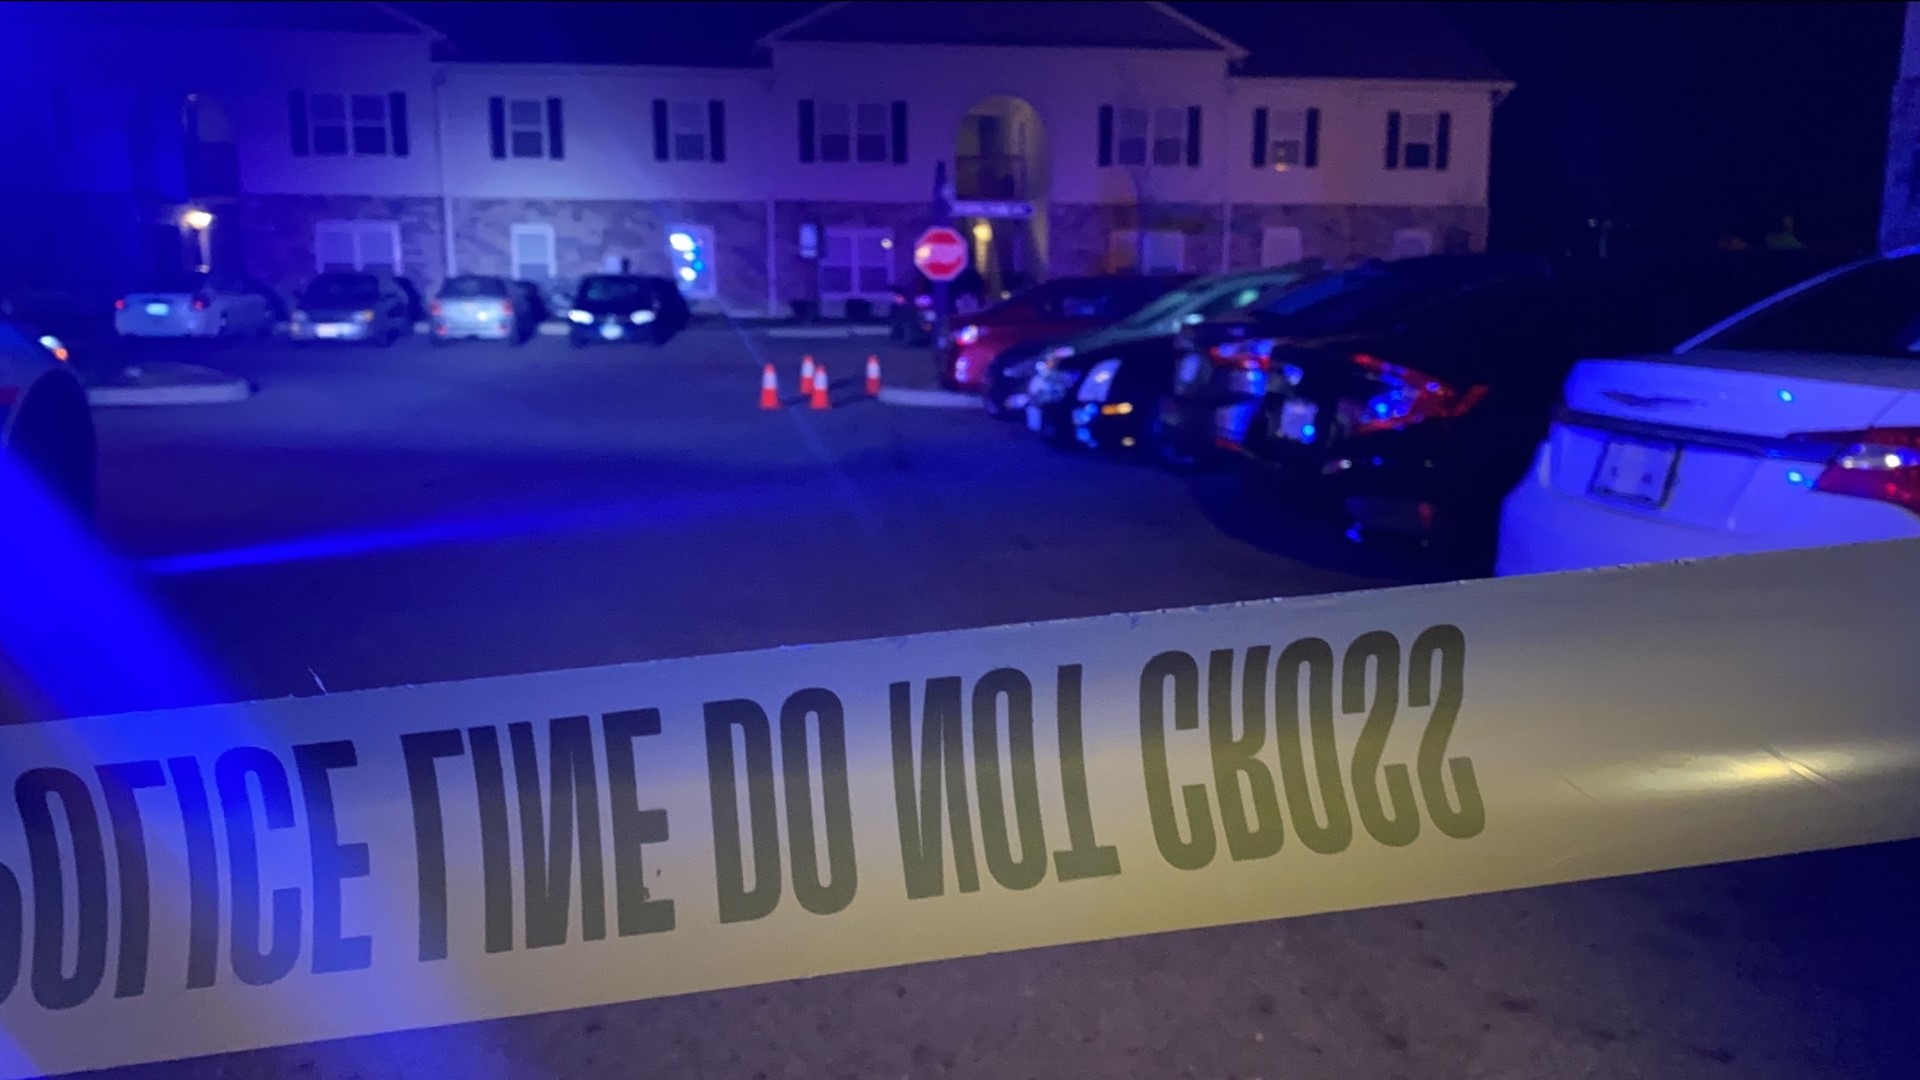 The shooting happened around 1:15 a.m. at 162 Tussing Park Drive, according to Columbus Police.